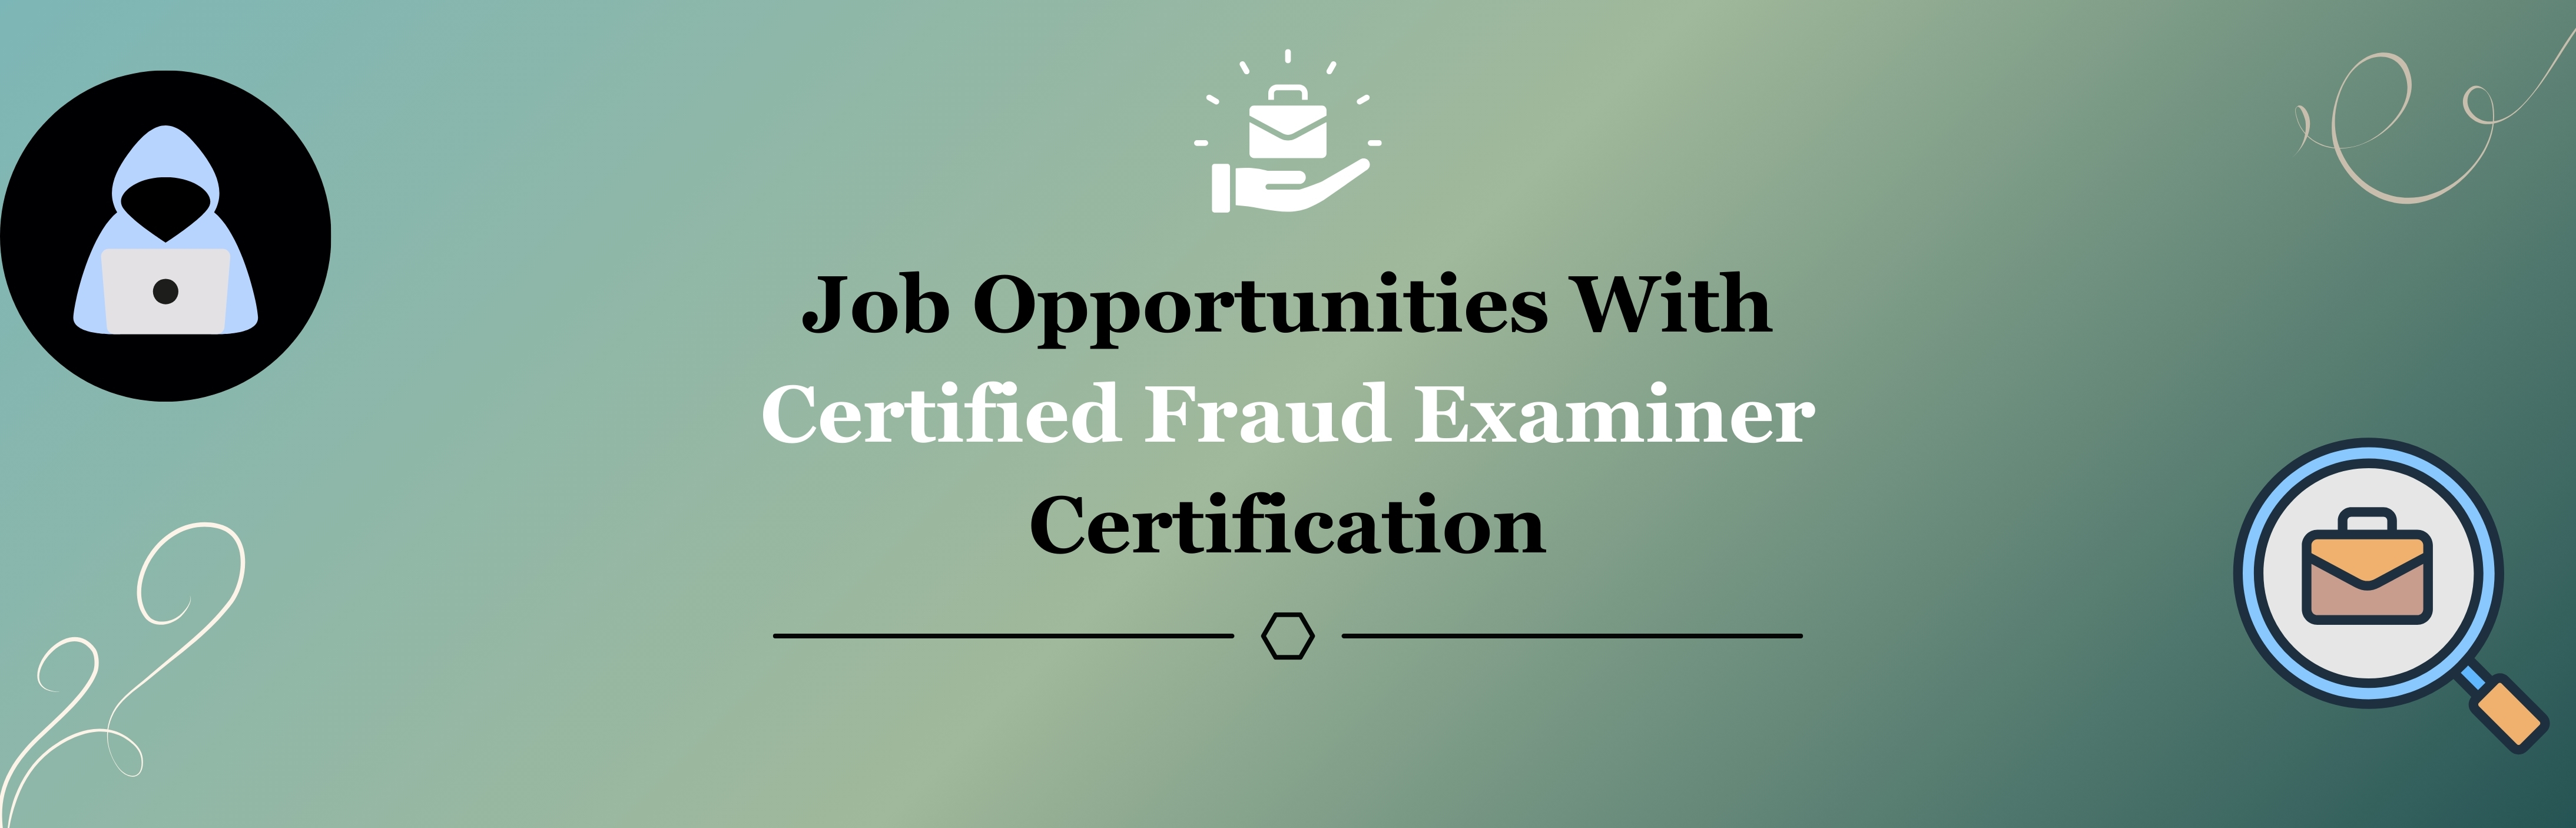 Job Opportunities With Certified Fraud Examiner Certification